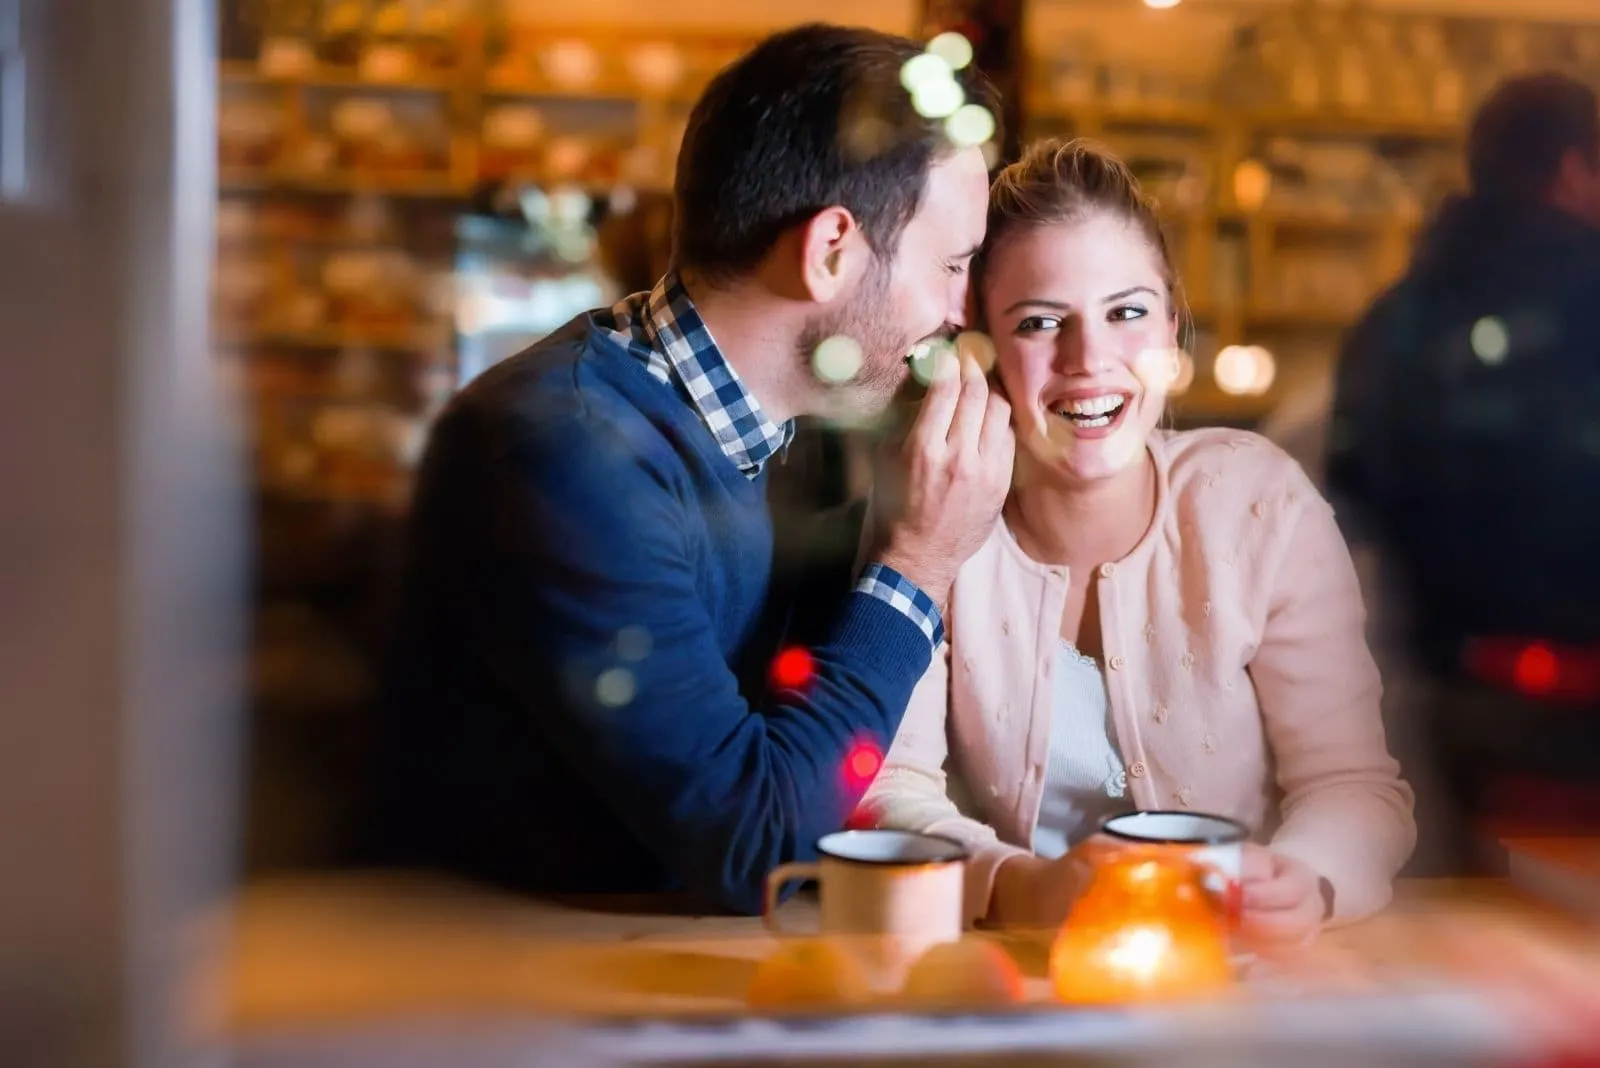 happy man whispering on the woman's ear while dating in a restaurant